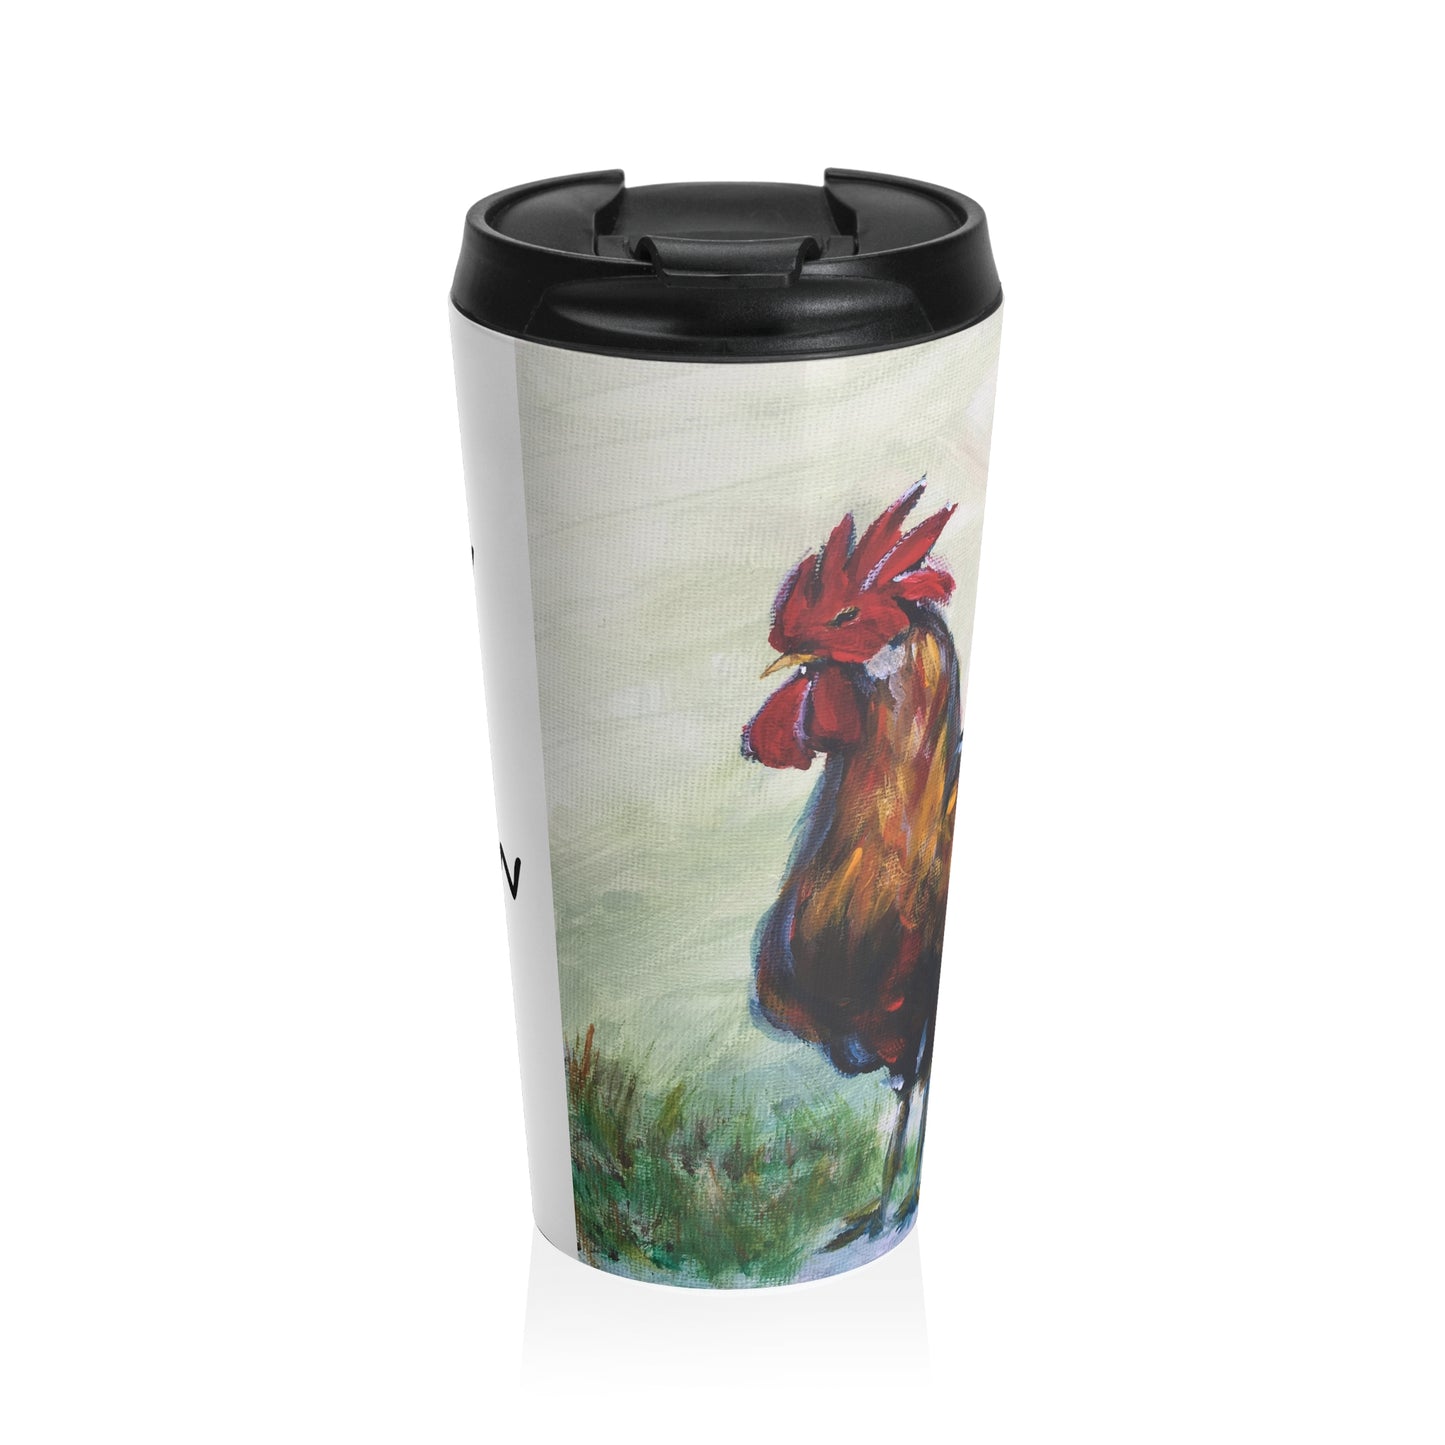 I'm Sexy and I Know it! (Rooster) Stainless Steel Travel Mug